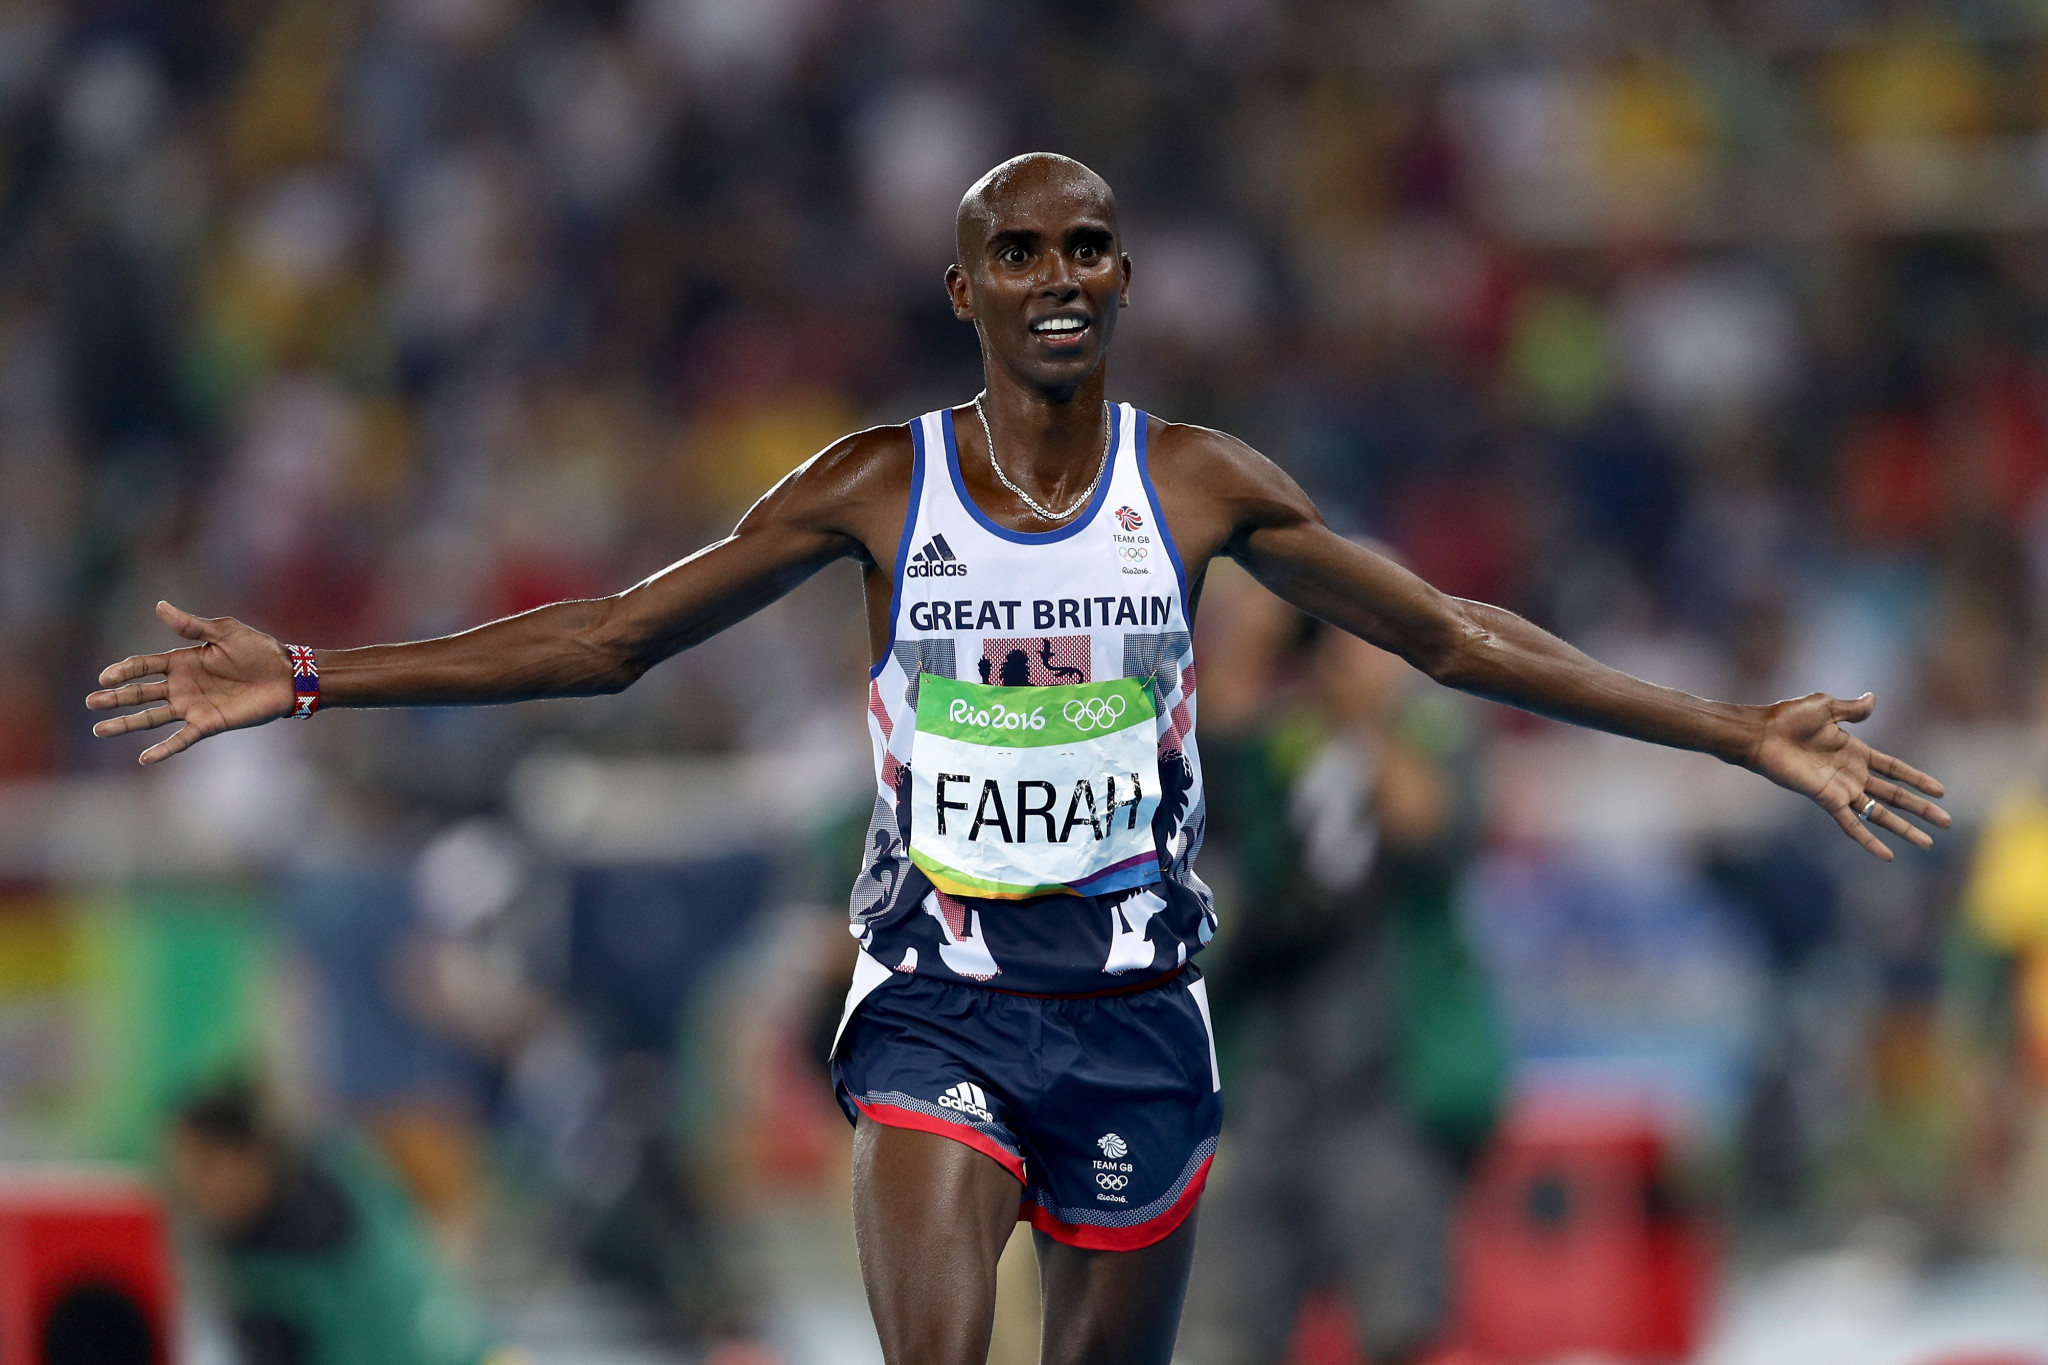 Farah says he was illegally trafficked to UK and forced into child labour